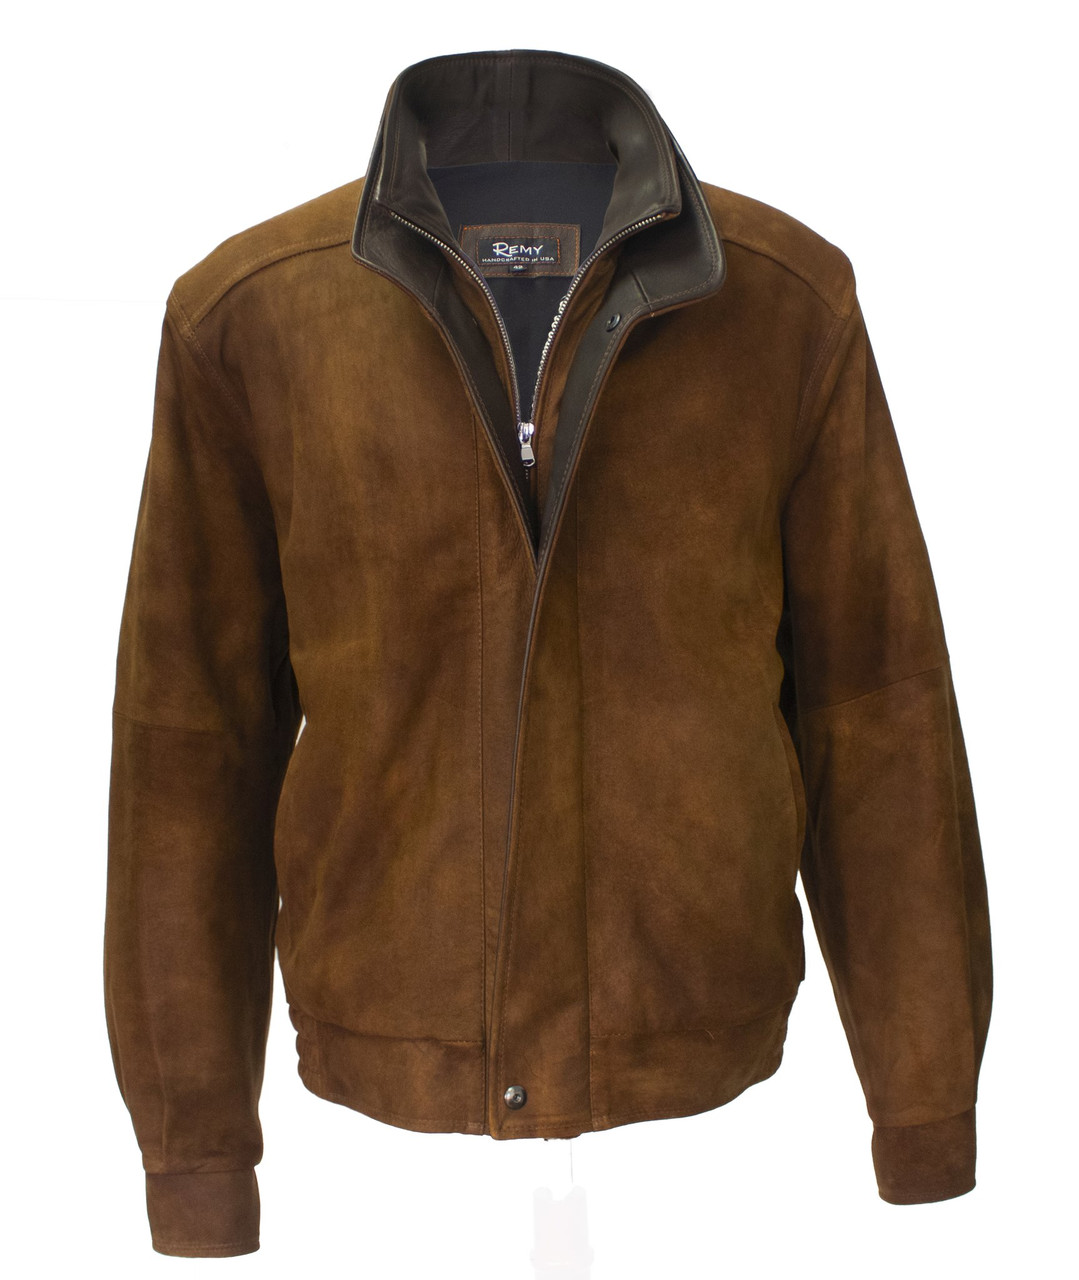 Remy Leather Men’s Double Collar Safari/Cocoa Lambskin Leather Bomber ...